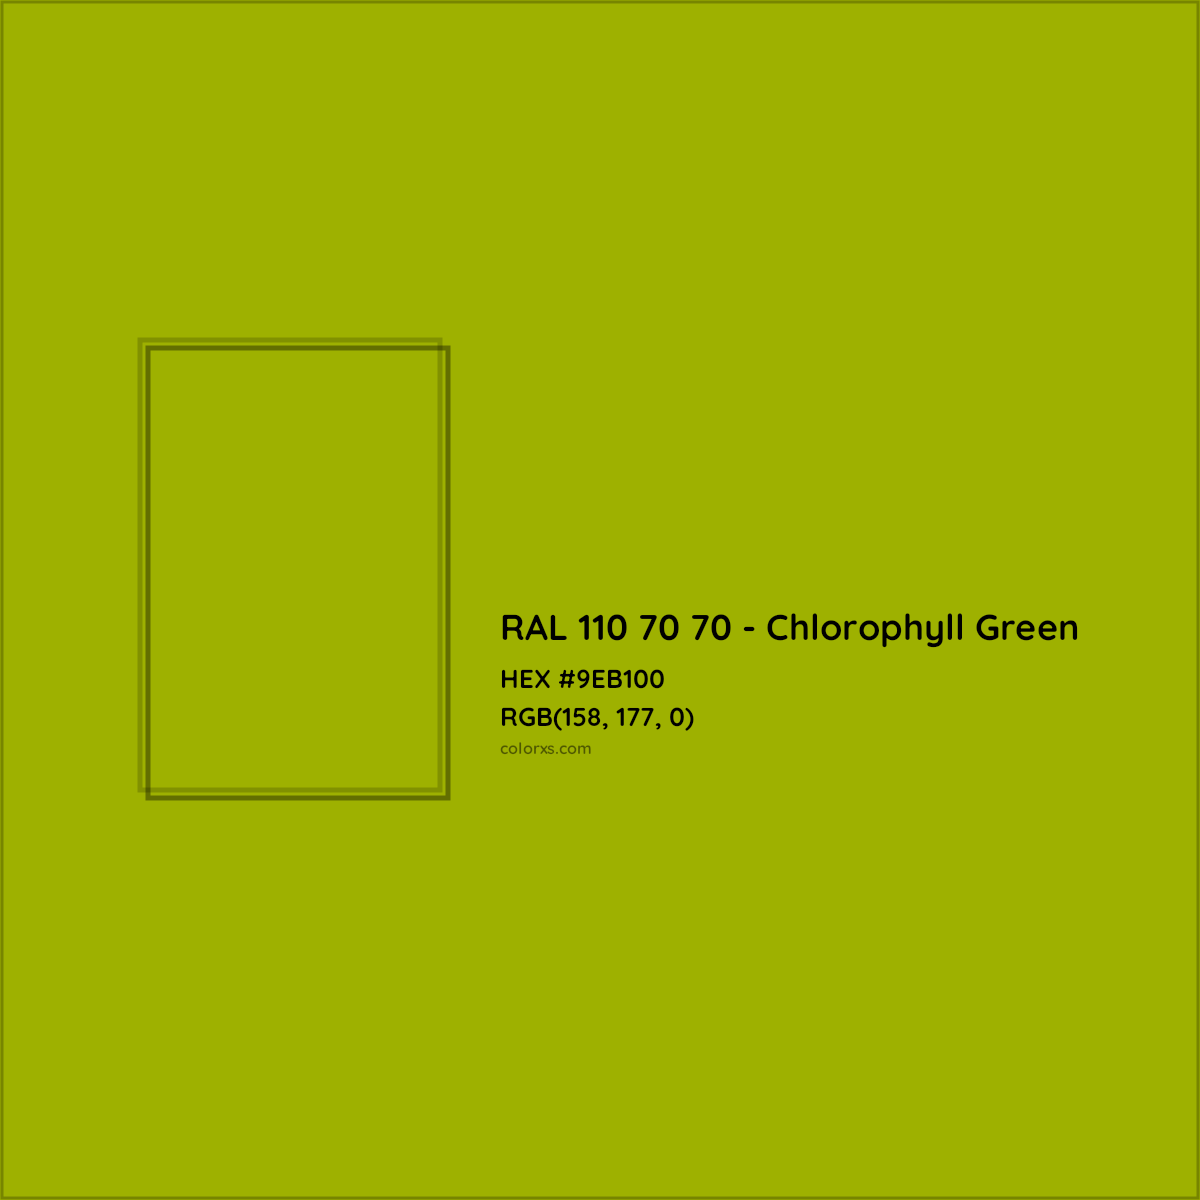 HEX #9EB100 RAL 110 70 70 - Chlorophyll Green CMS RAL Design - Color Code